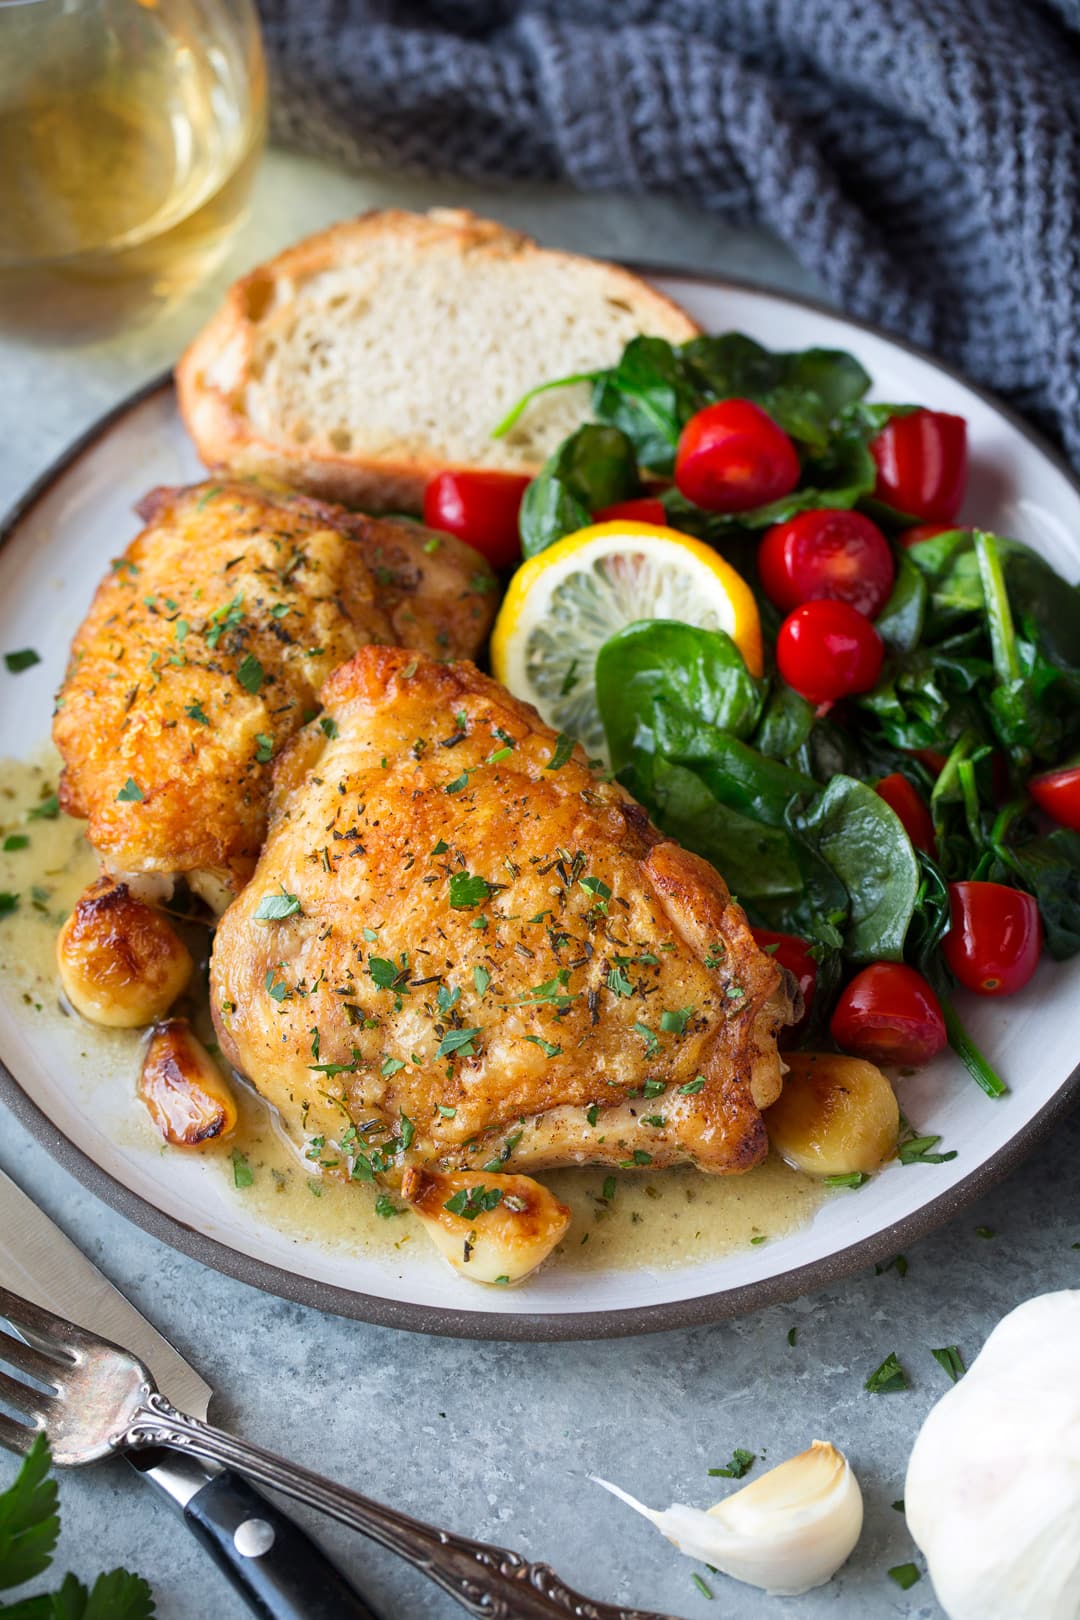 Roast chicken with garlic shown in on a single serve plate with pan sauce, along with a side salad, and fresh bread.